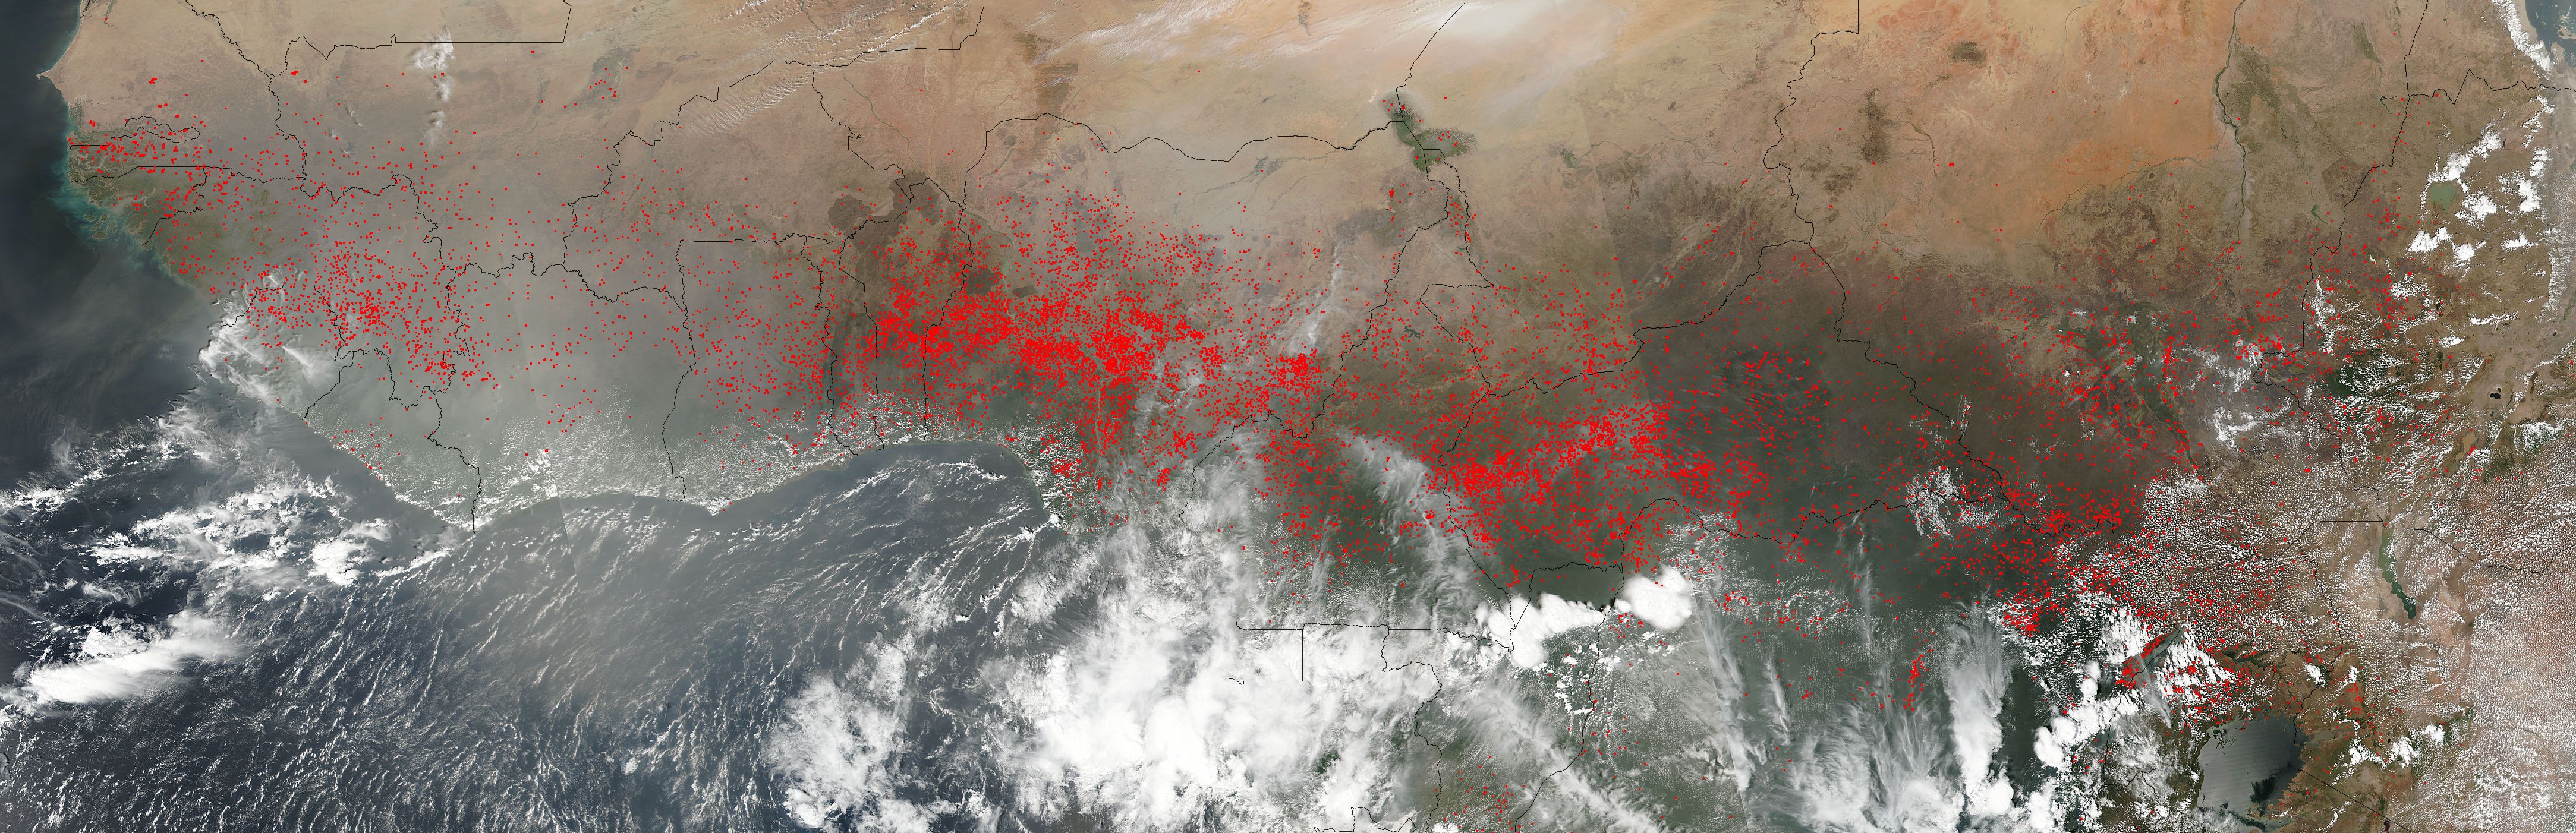 Fires and dust across western and central Africa - related image preview